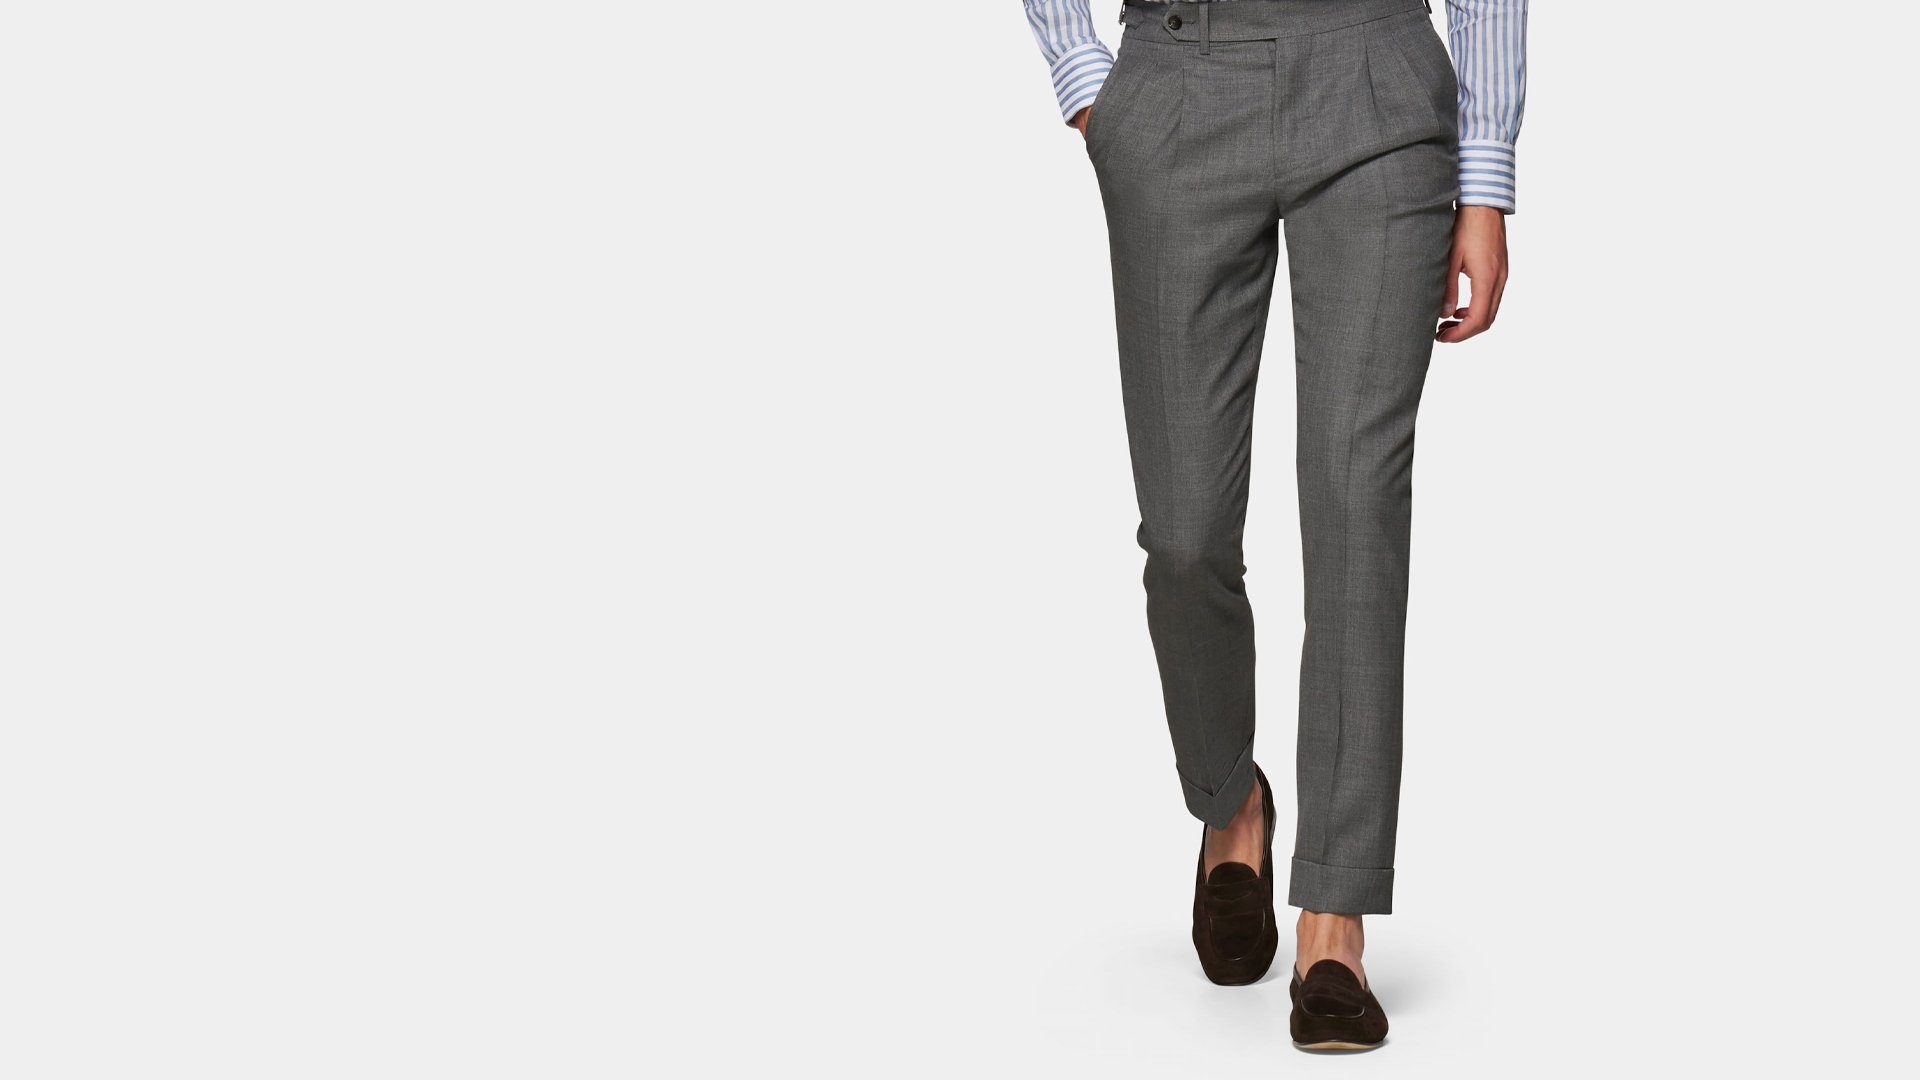 Trousers Every Man Should Own (And How they Need to Fit)